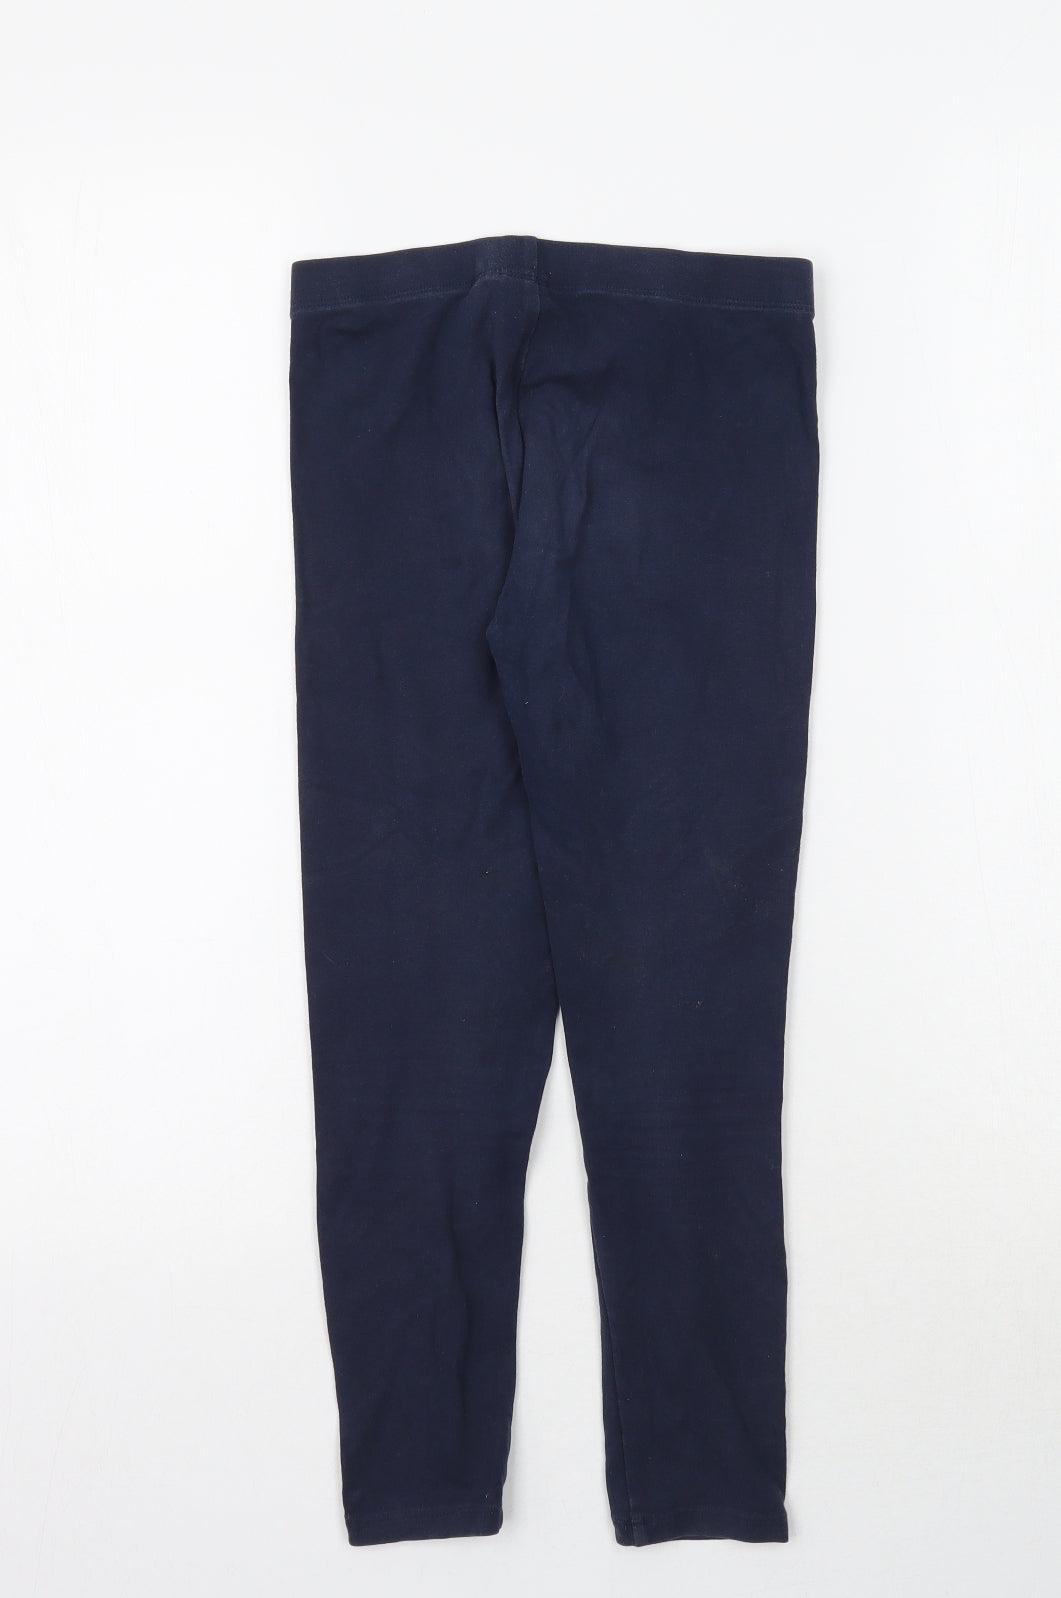 NEXT Girls Blue    Trousers Size 9 Months - Leggings